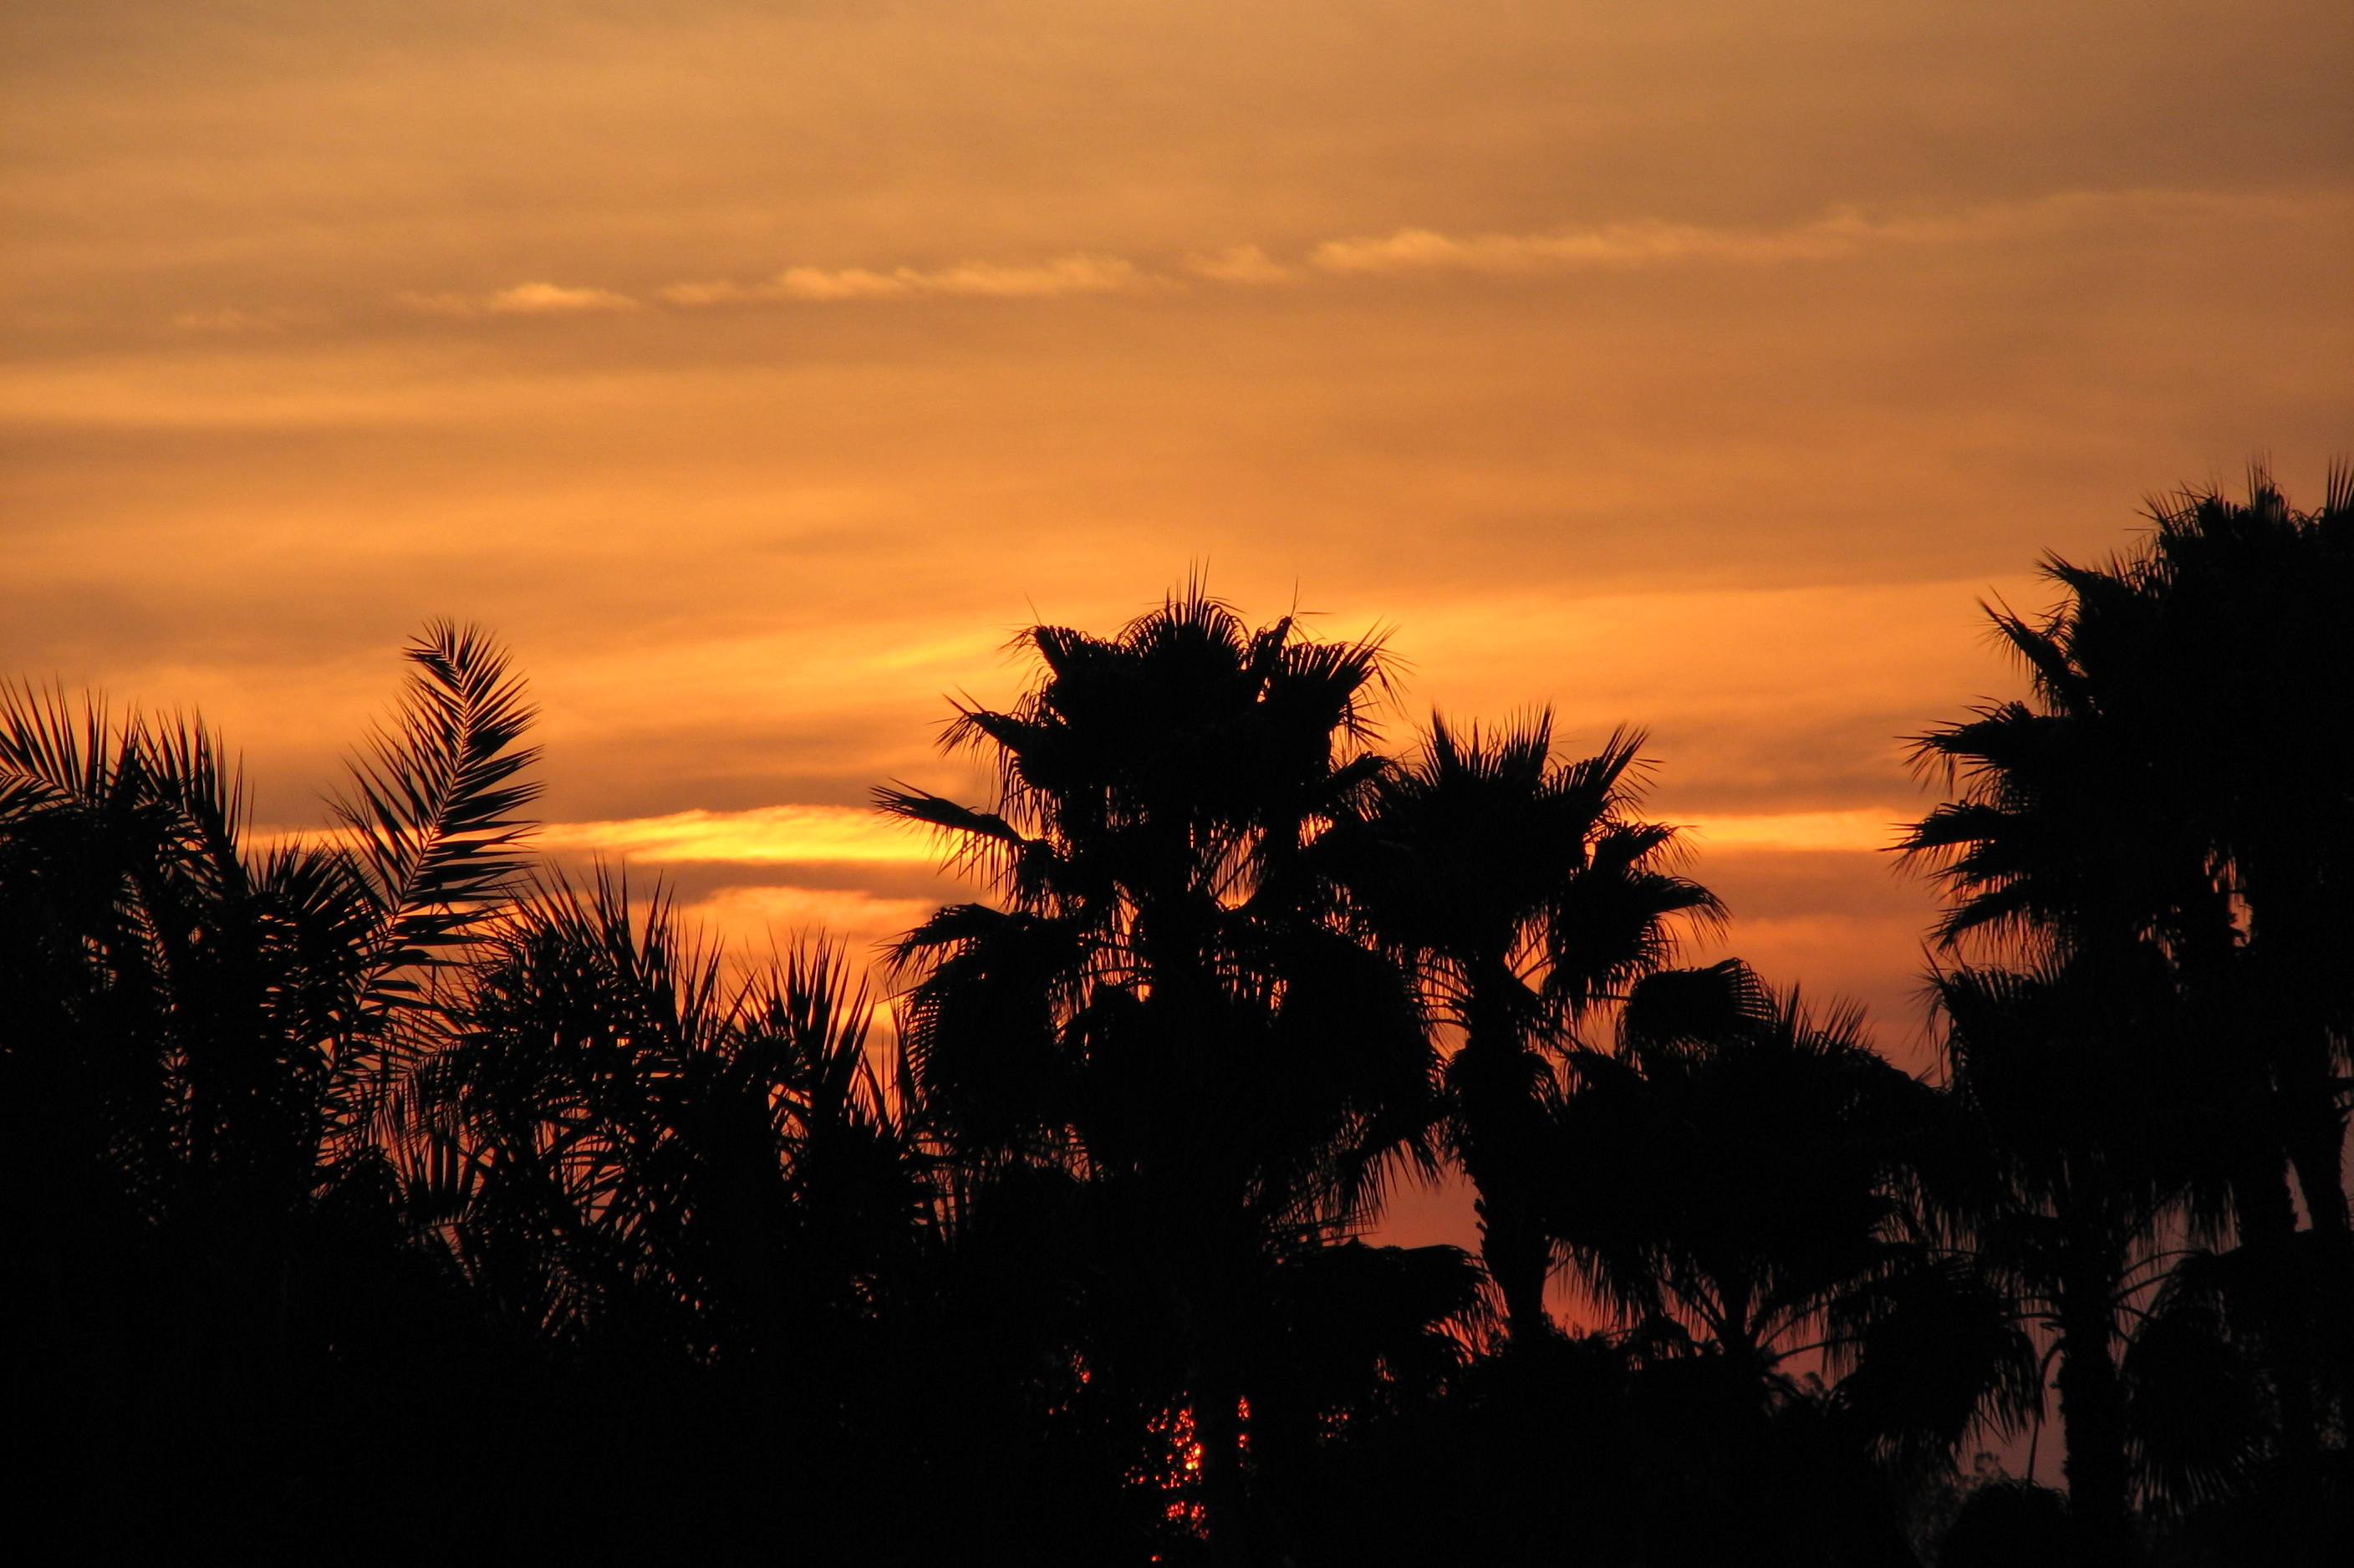 Sunset behind palm trees